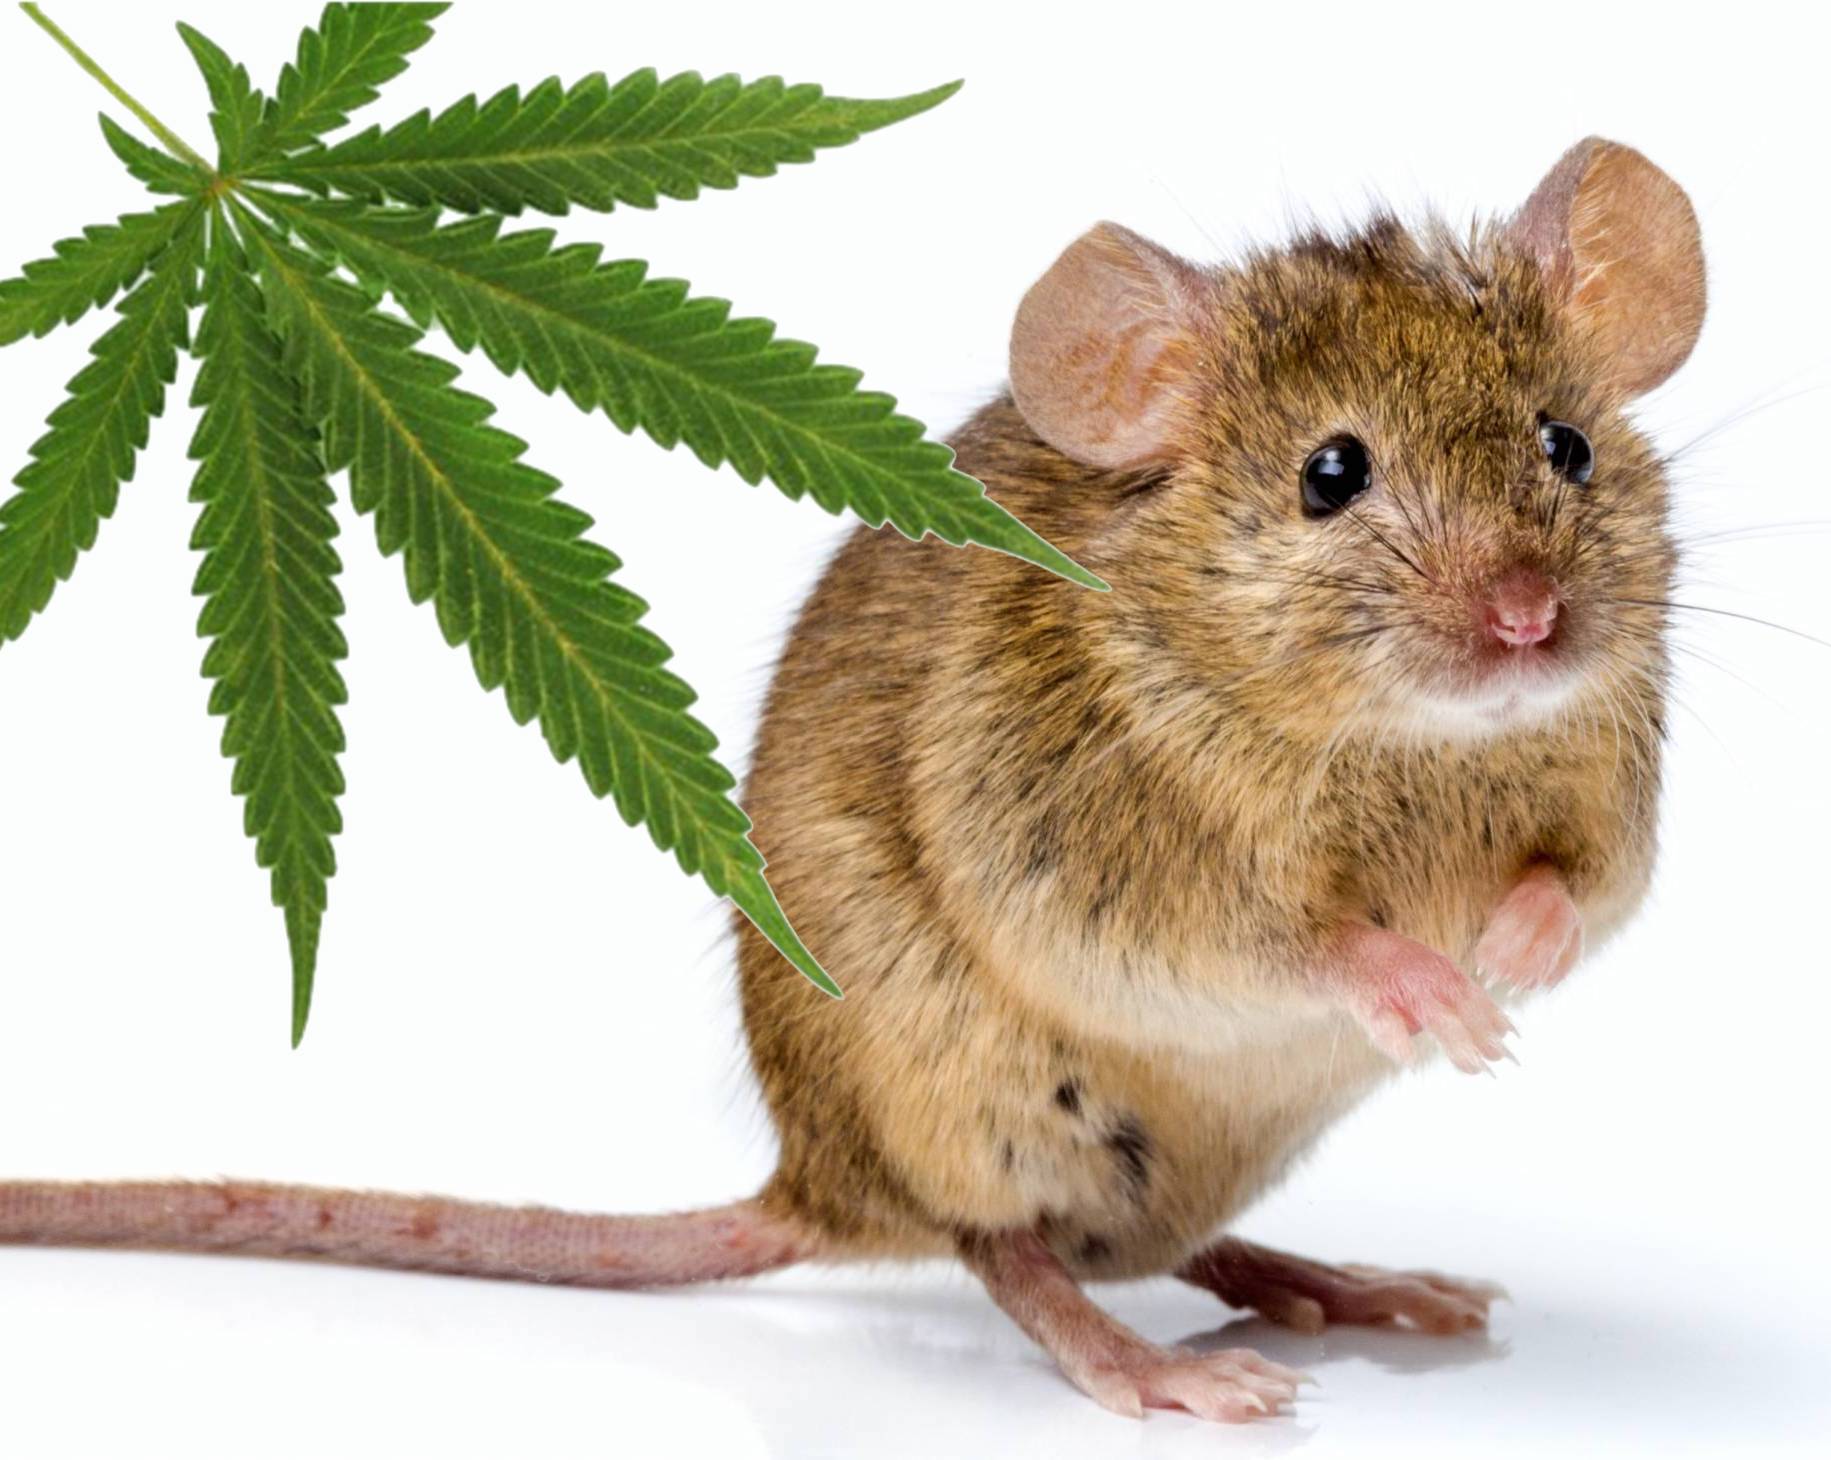 mouse and cannabis